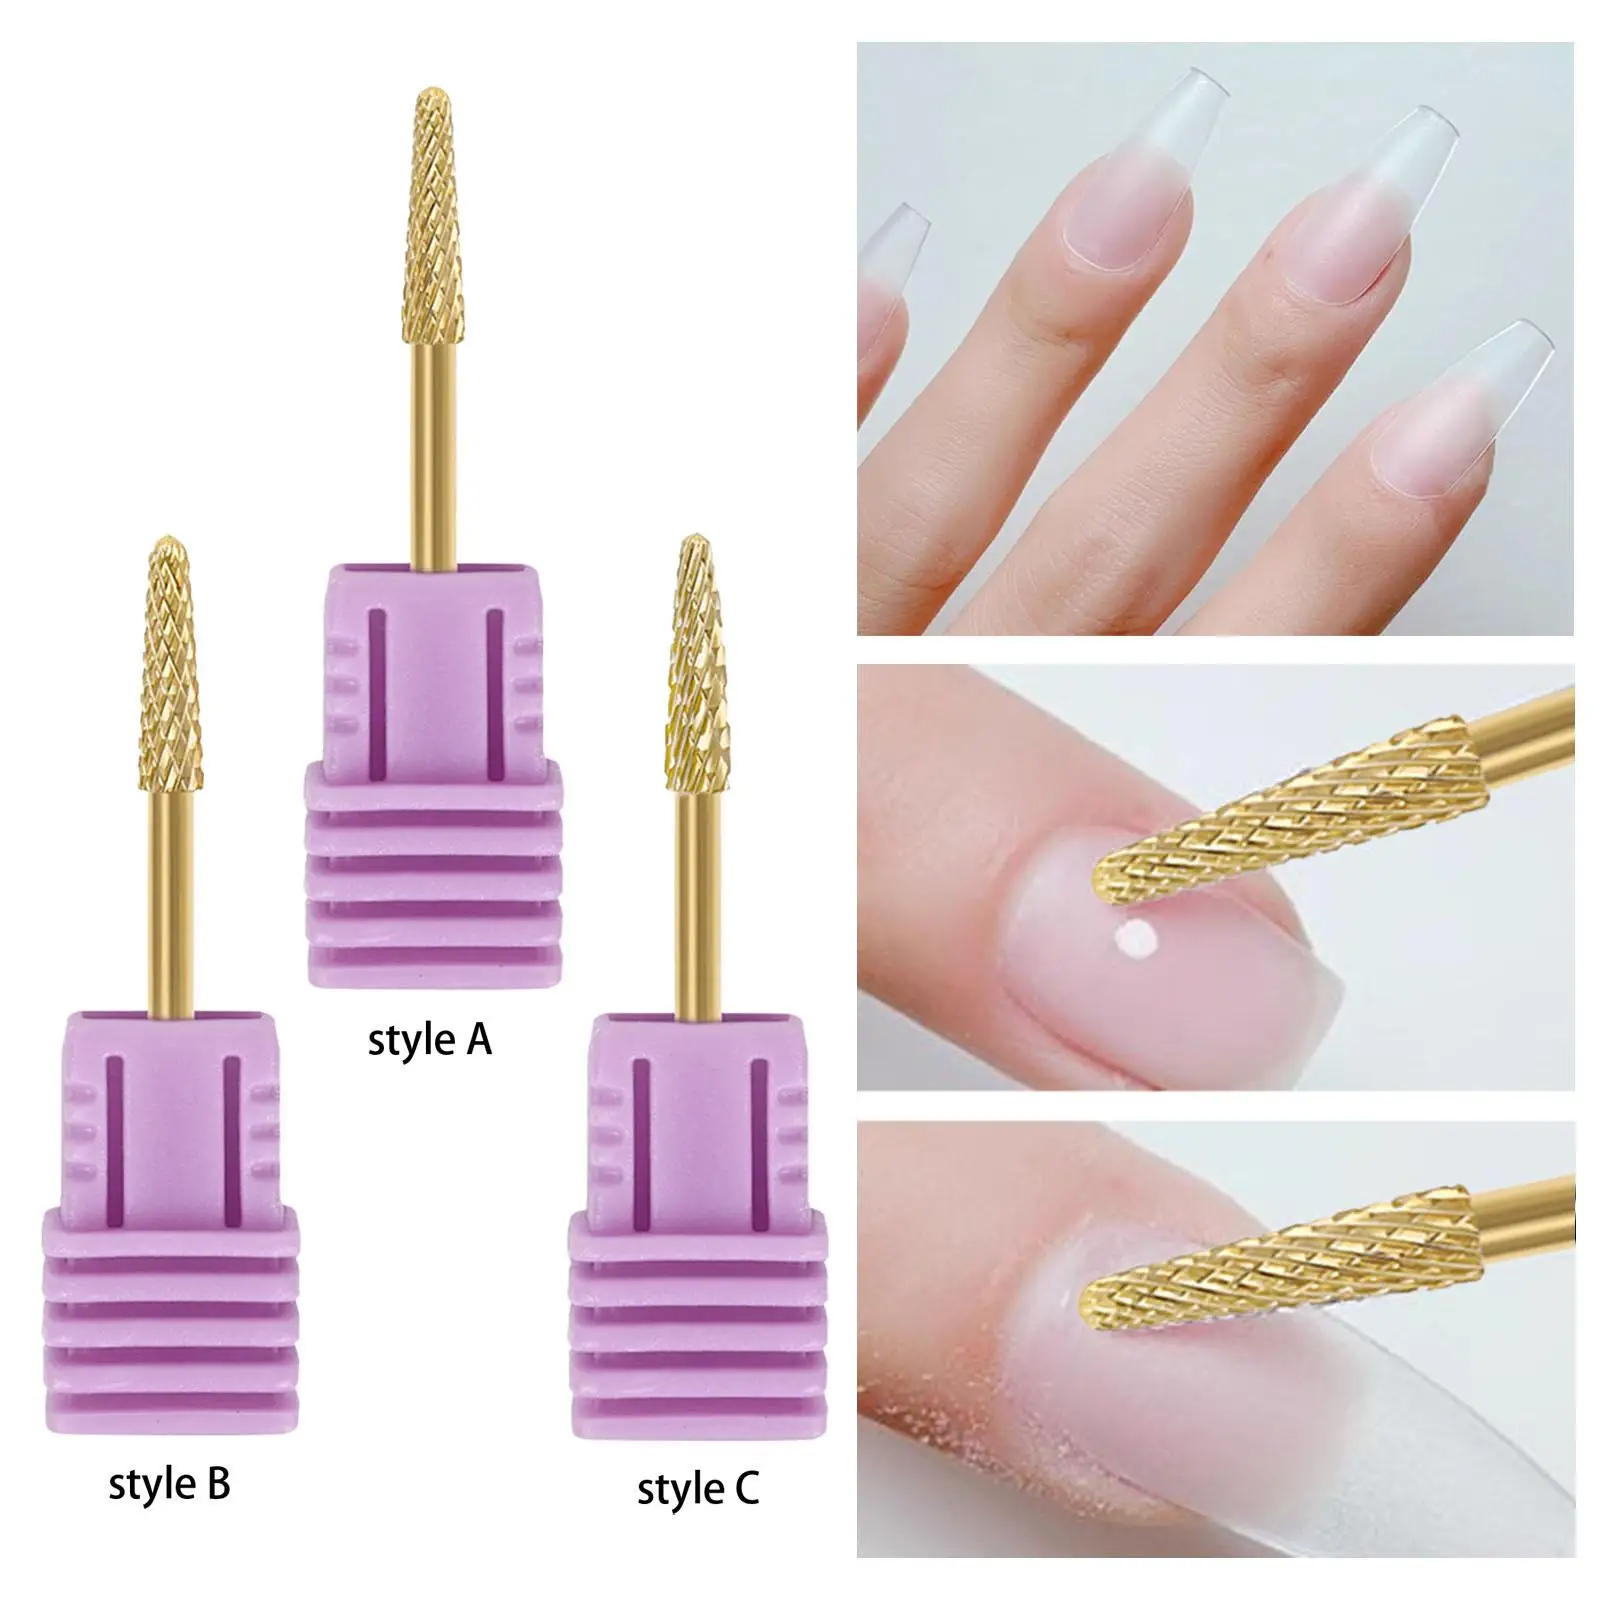 3mm Nail Sanding Bands Mandrel Nail Drill Accessories Portable Tungsten Steel Nail Drill Mandrel for Manicure Pedicures Manicure